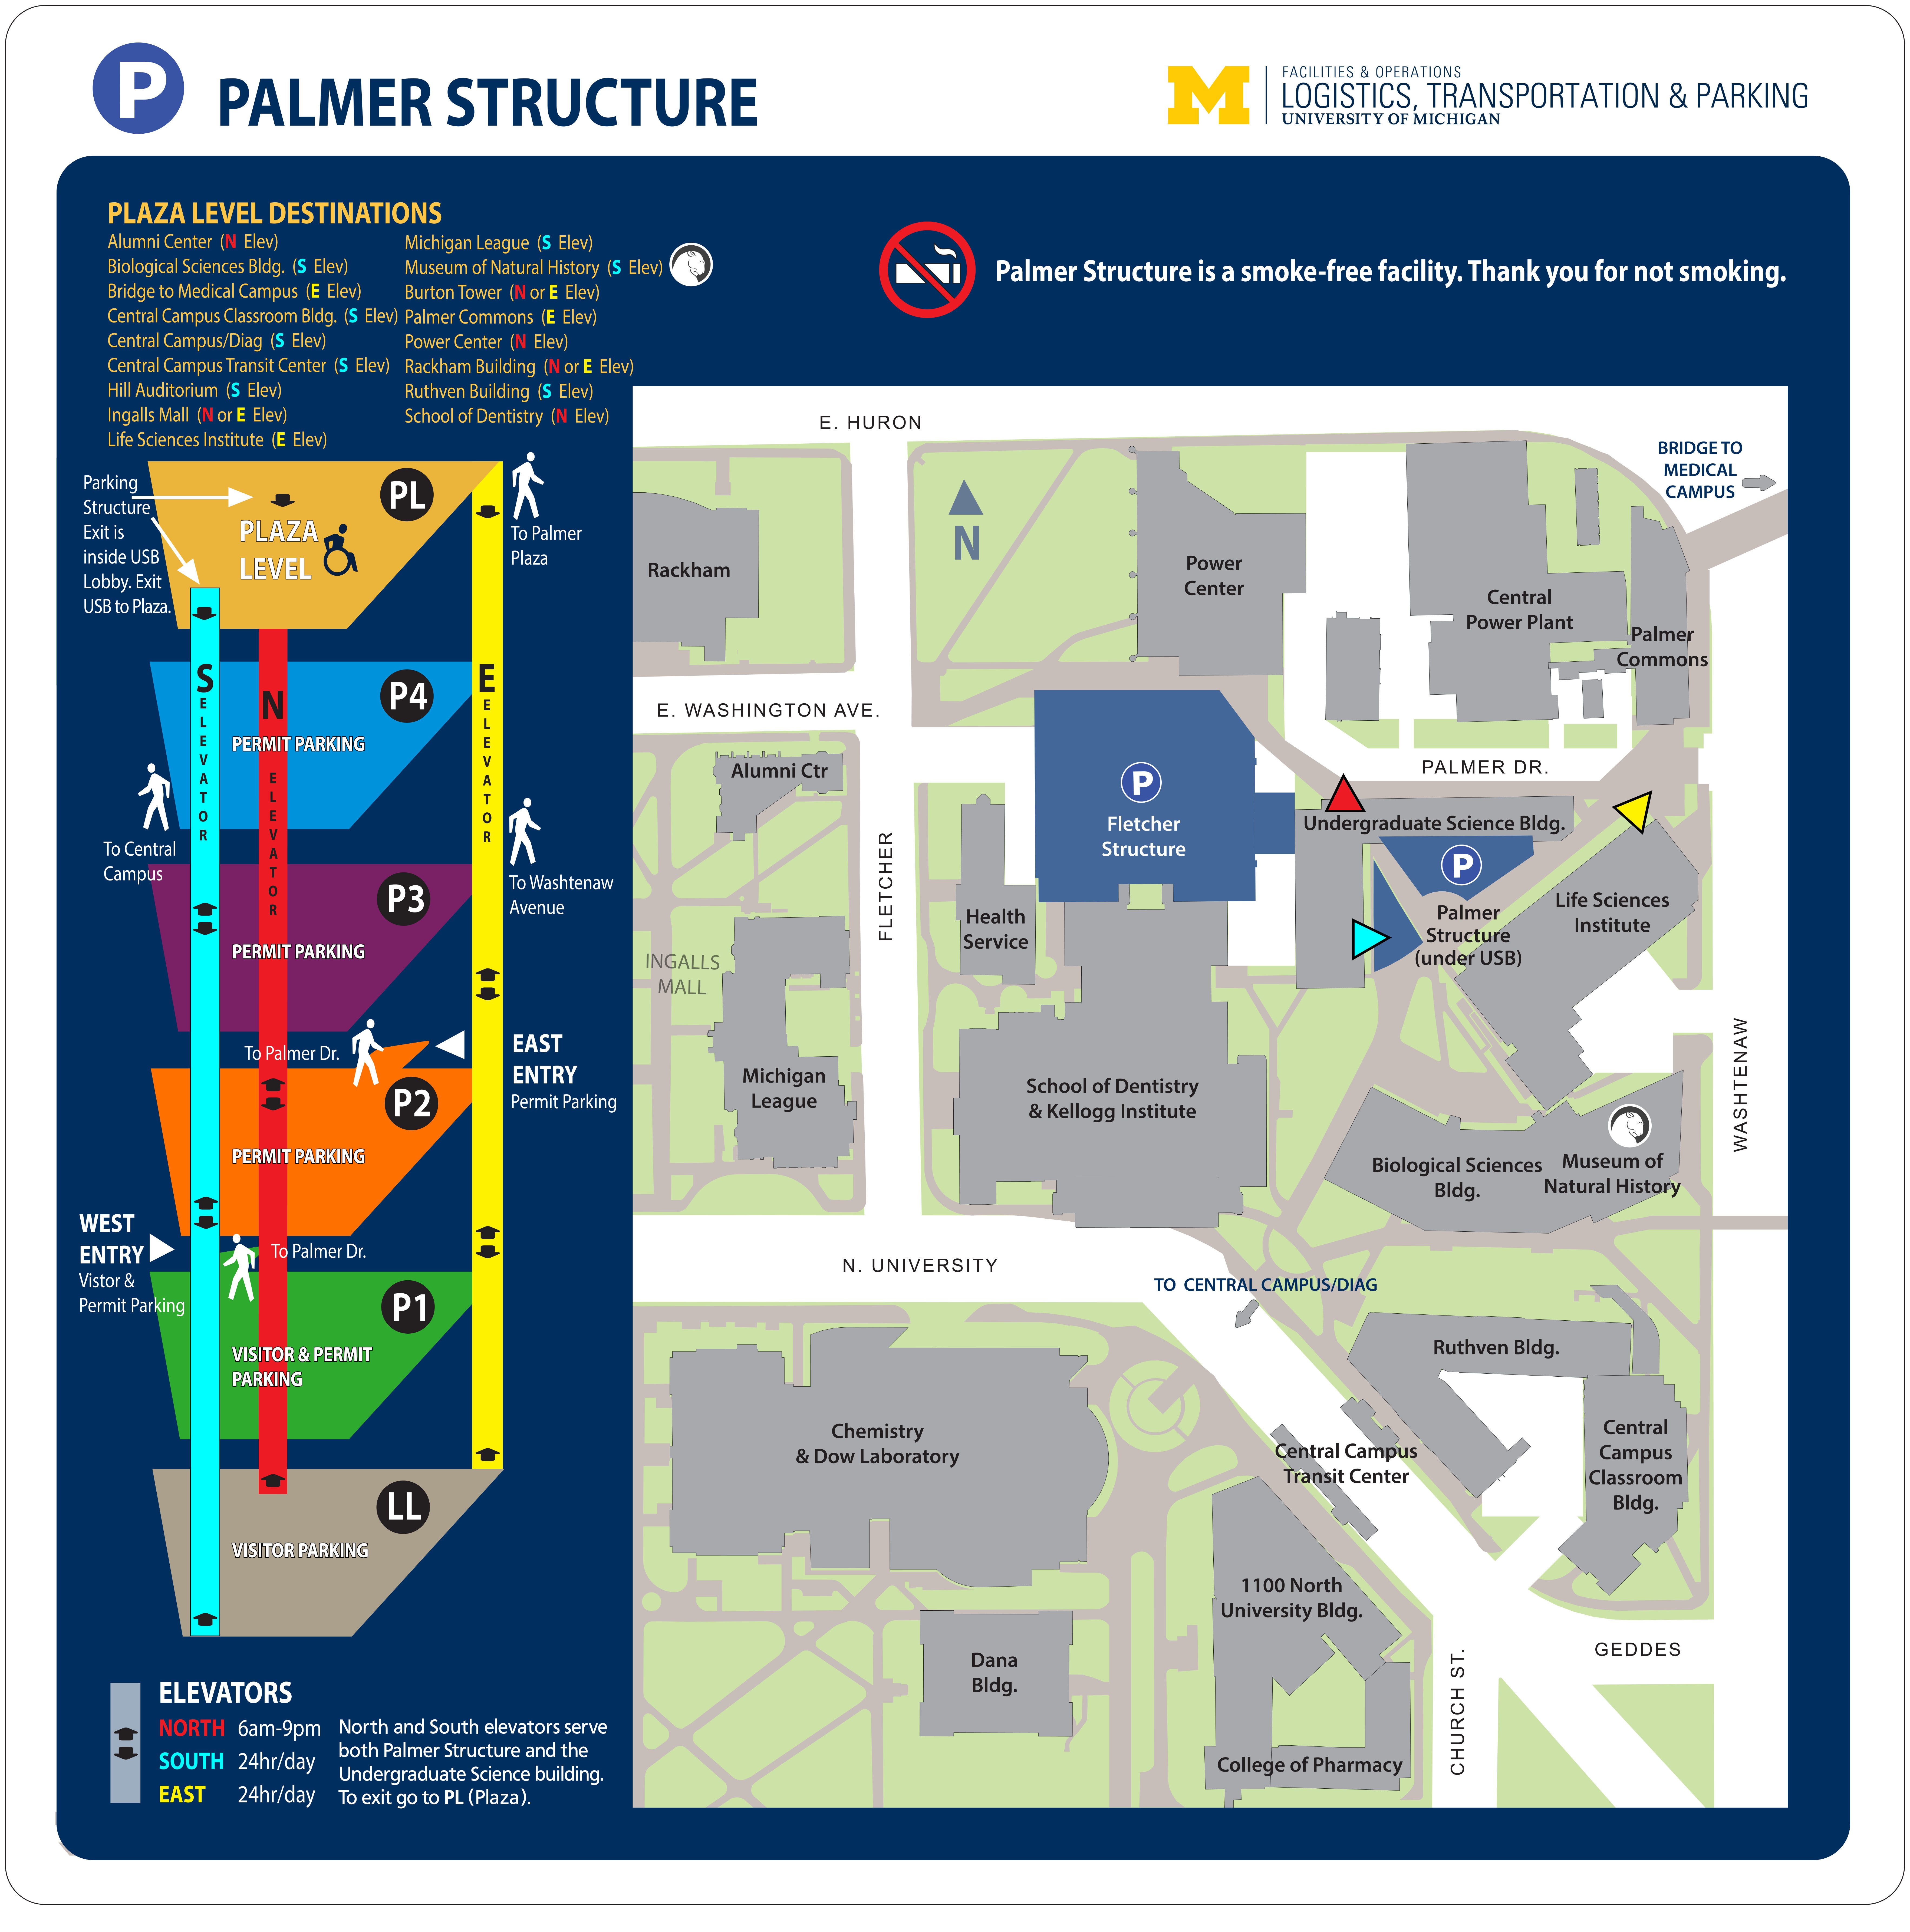 Parking Map with directions to the Palmer Structure and the elevator levels of the building